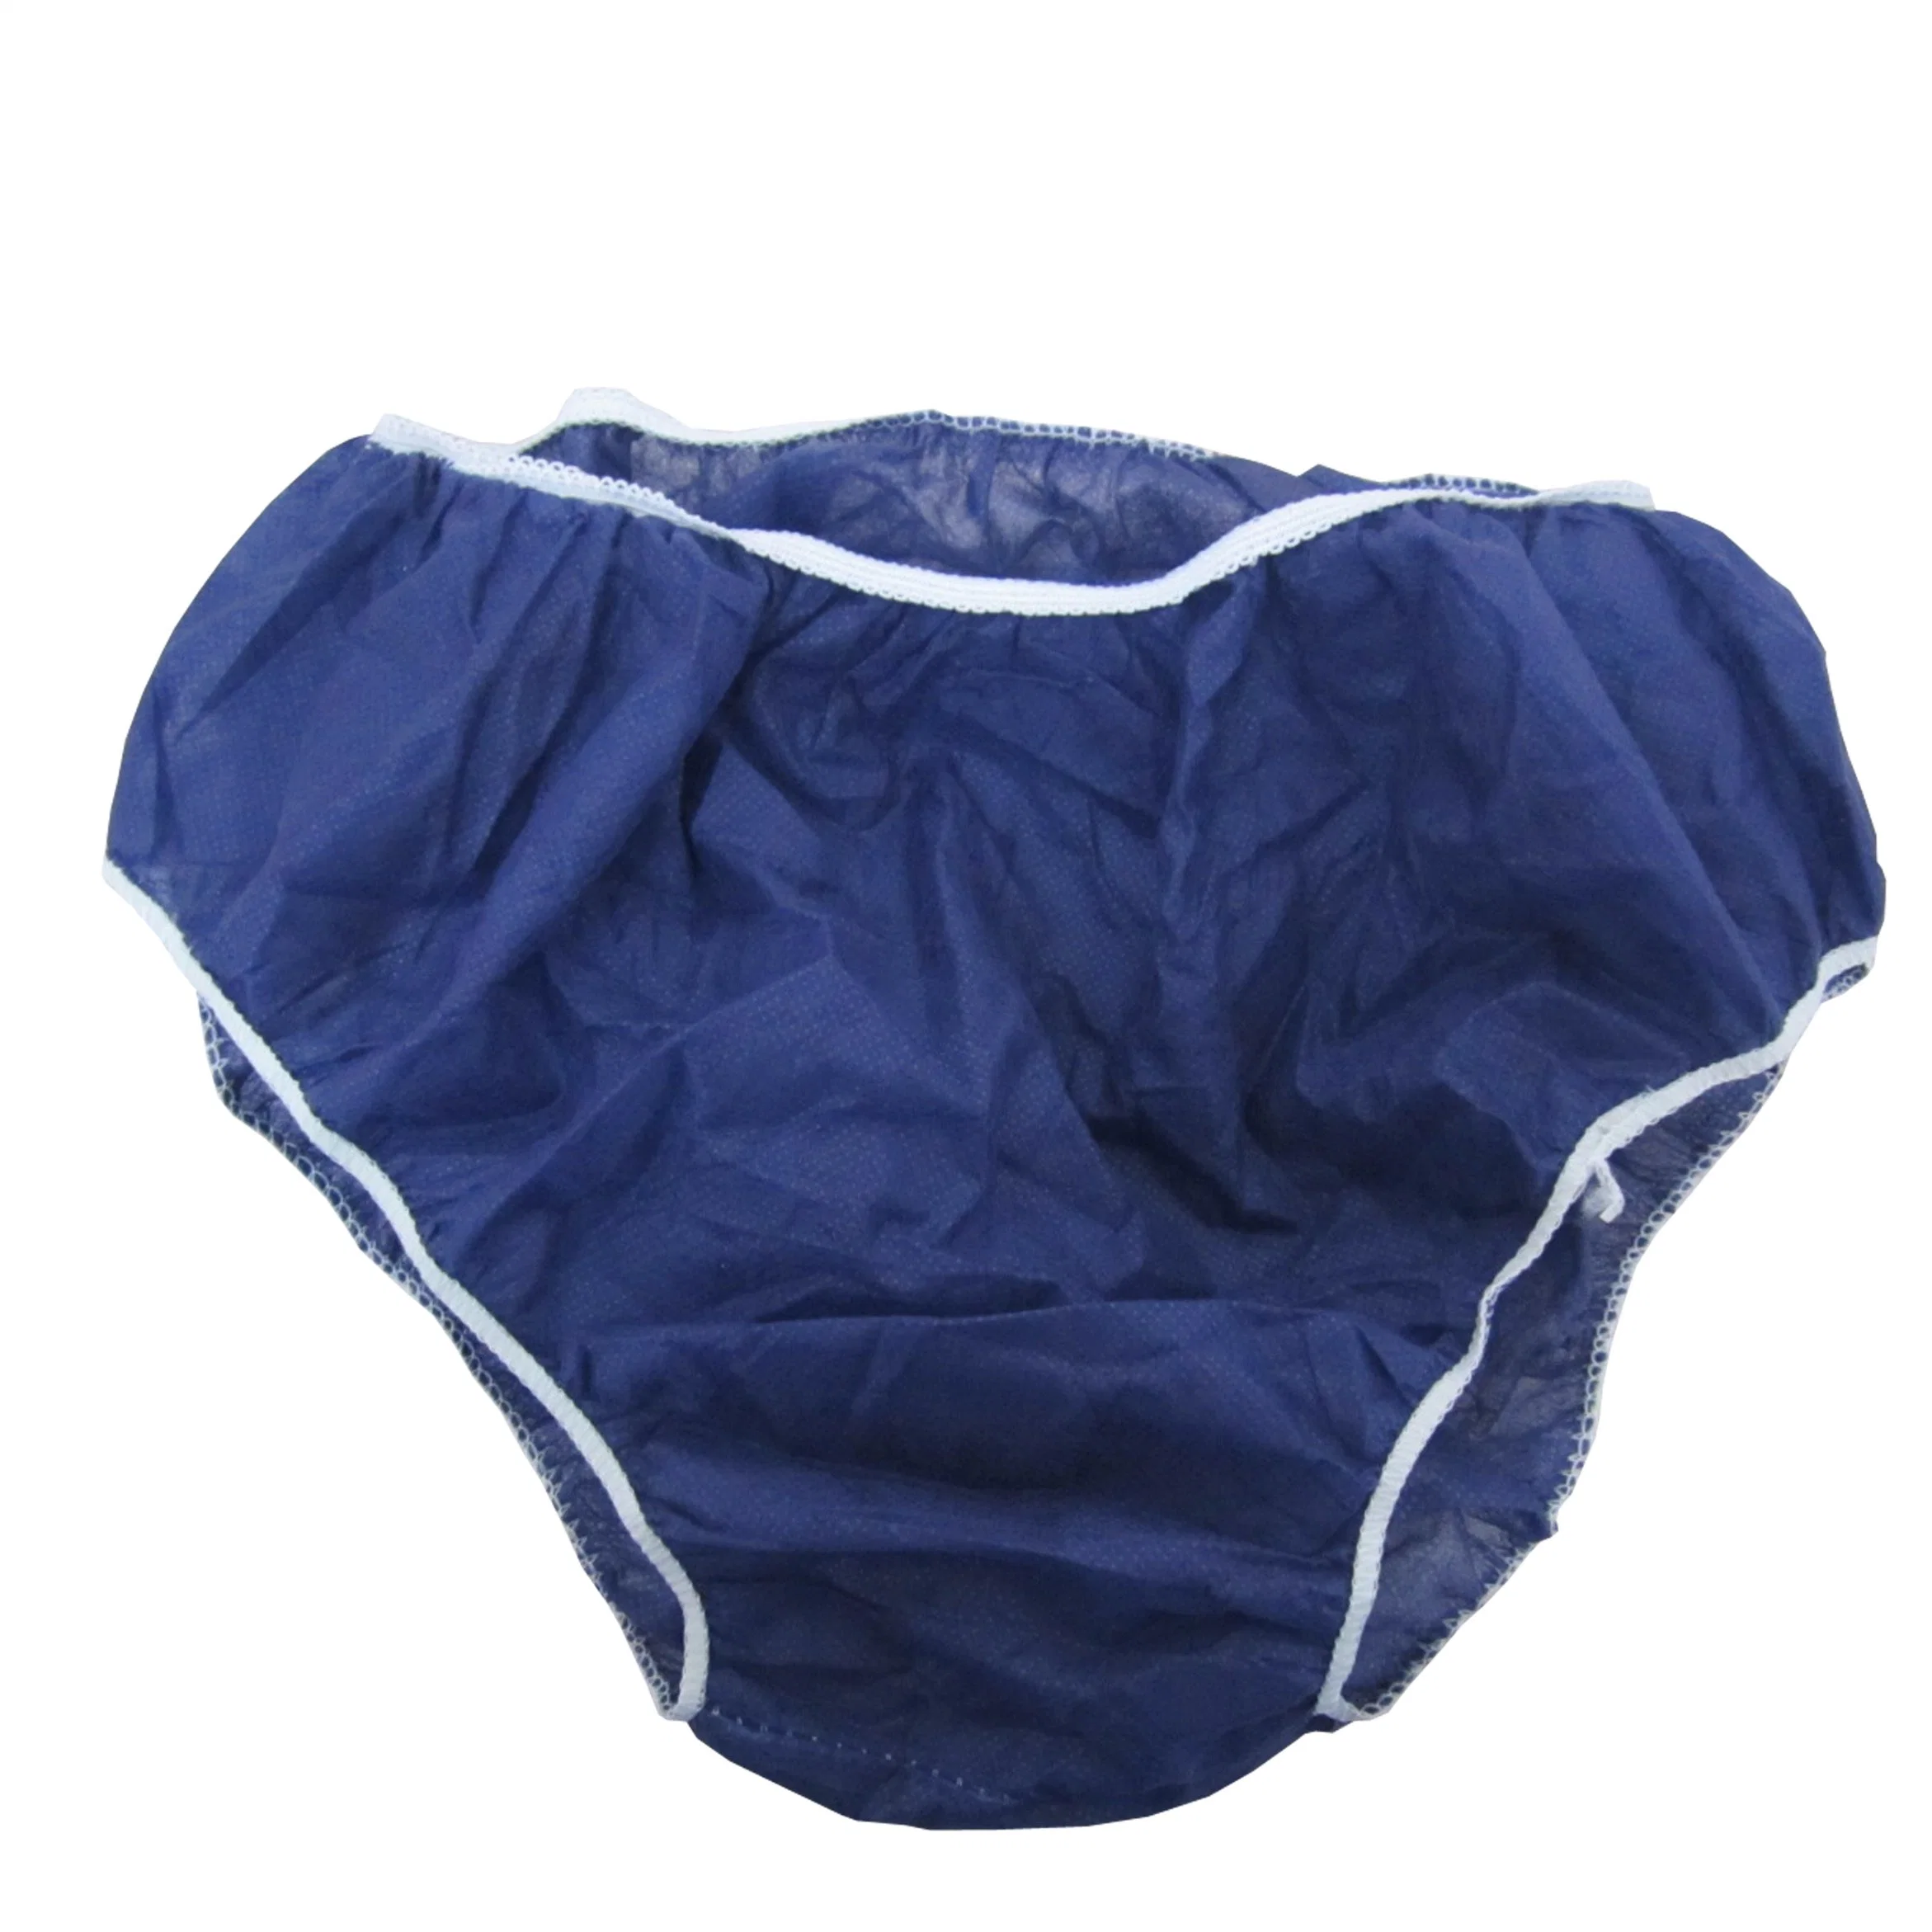 Hot Sell Nonwoven Disposable Panties for Women, Disposable Underwear Ladies Panties